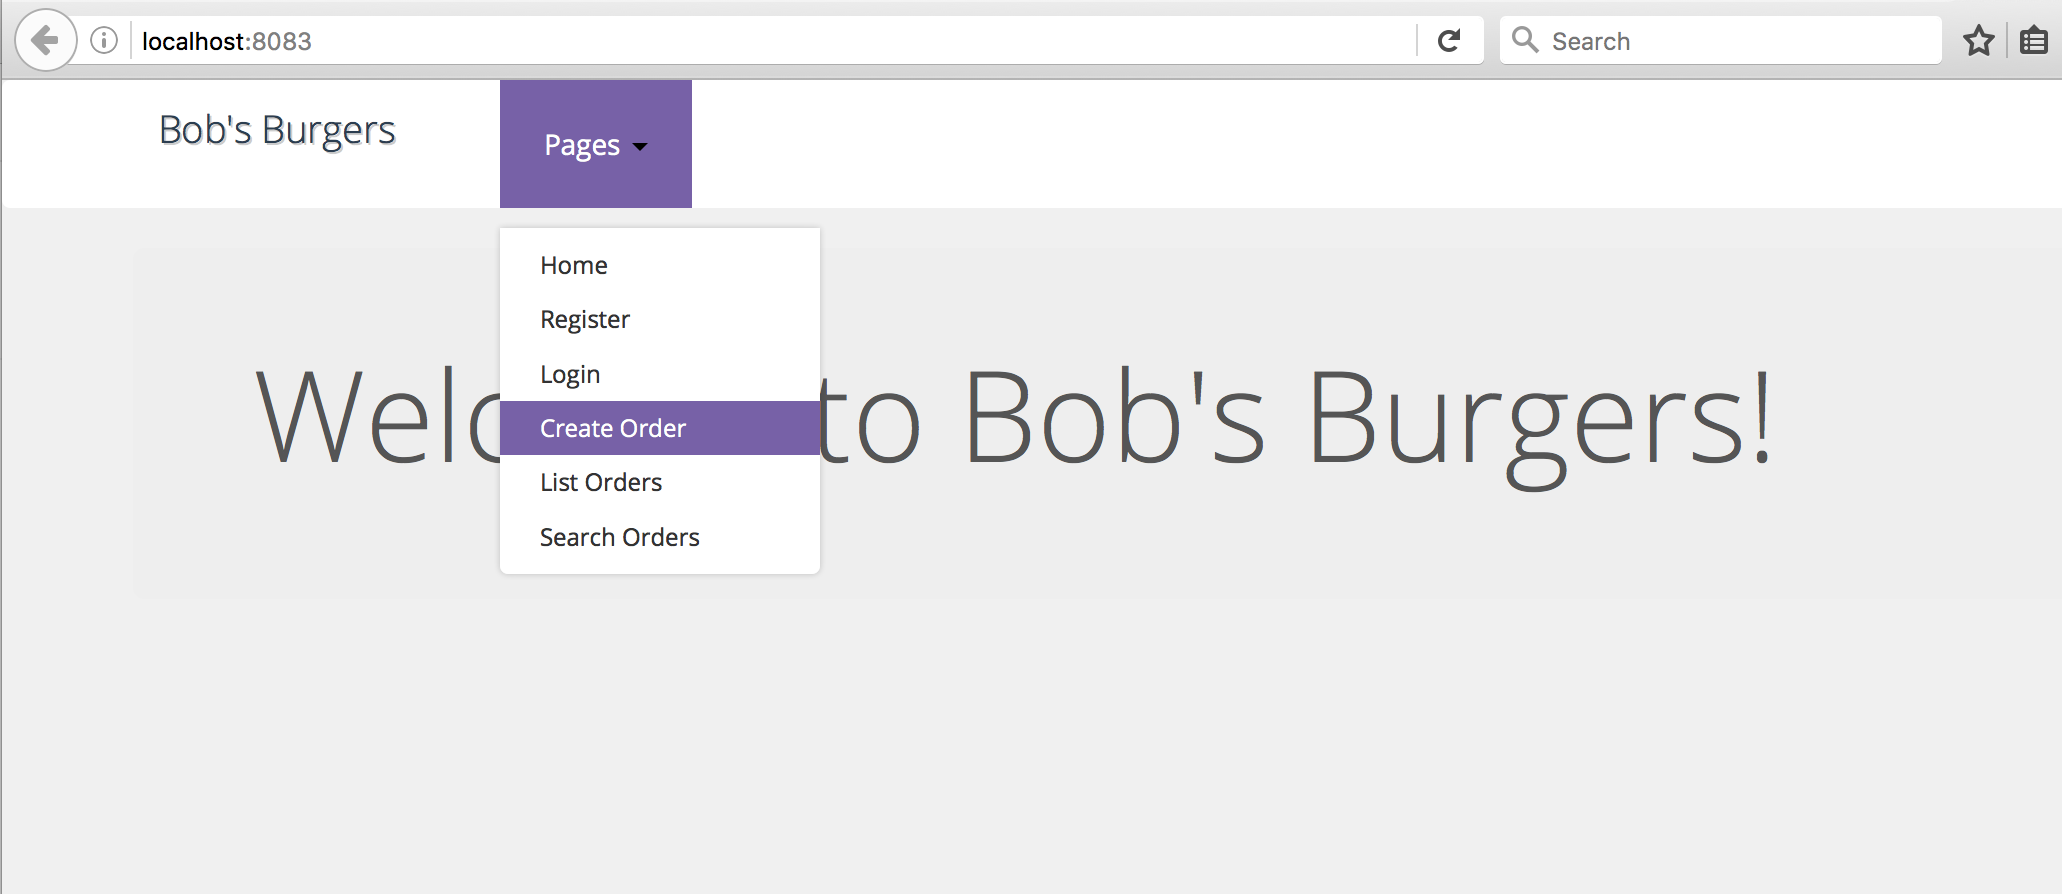 navigate to Create Order page